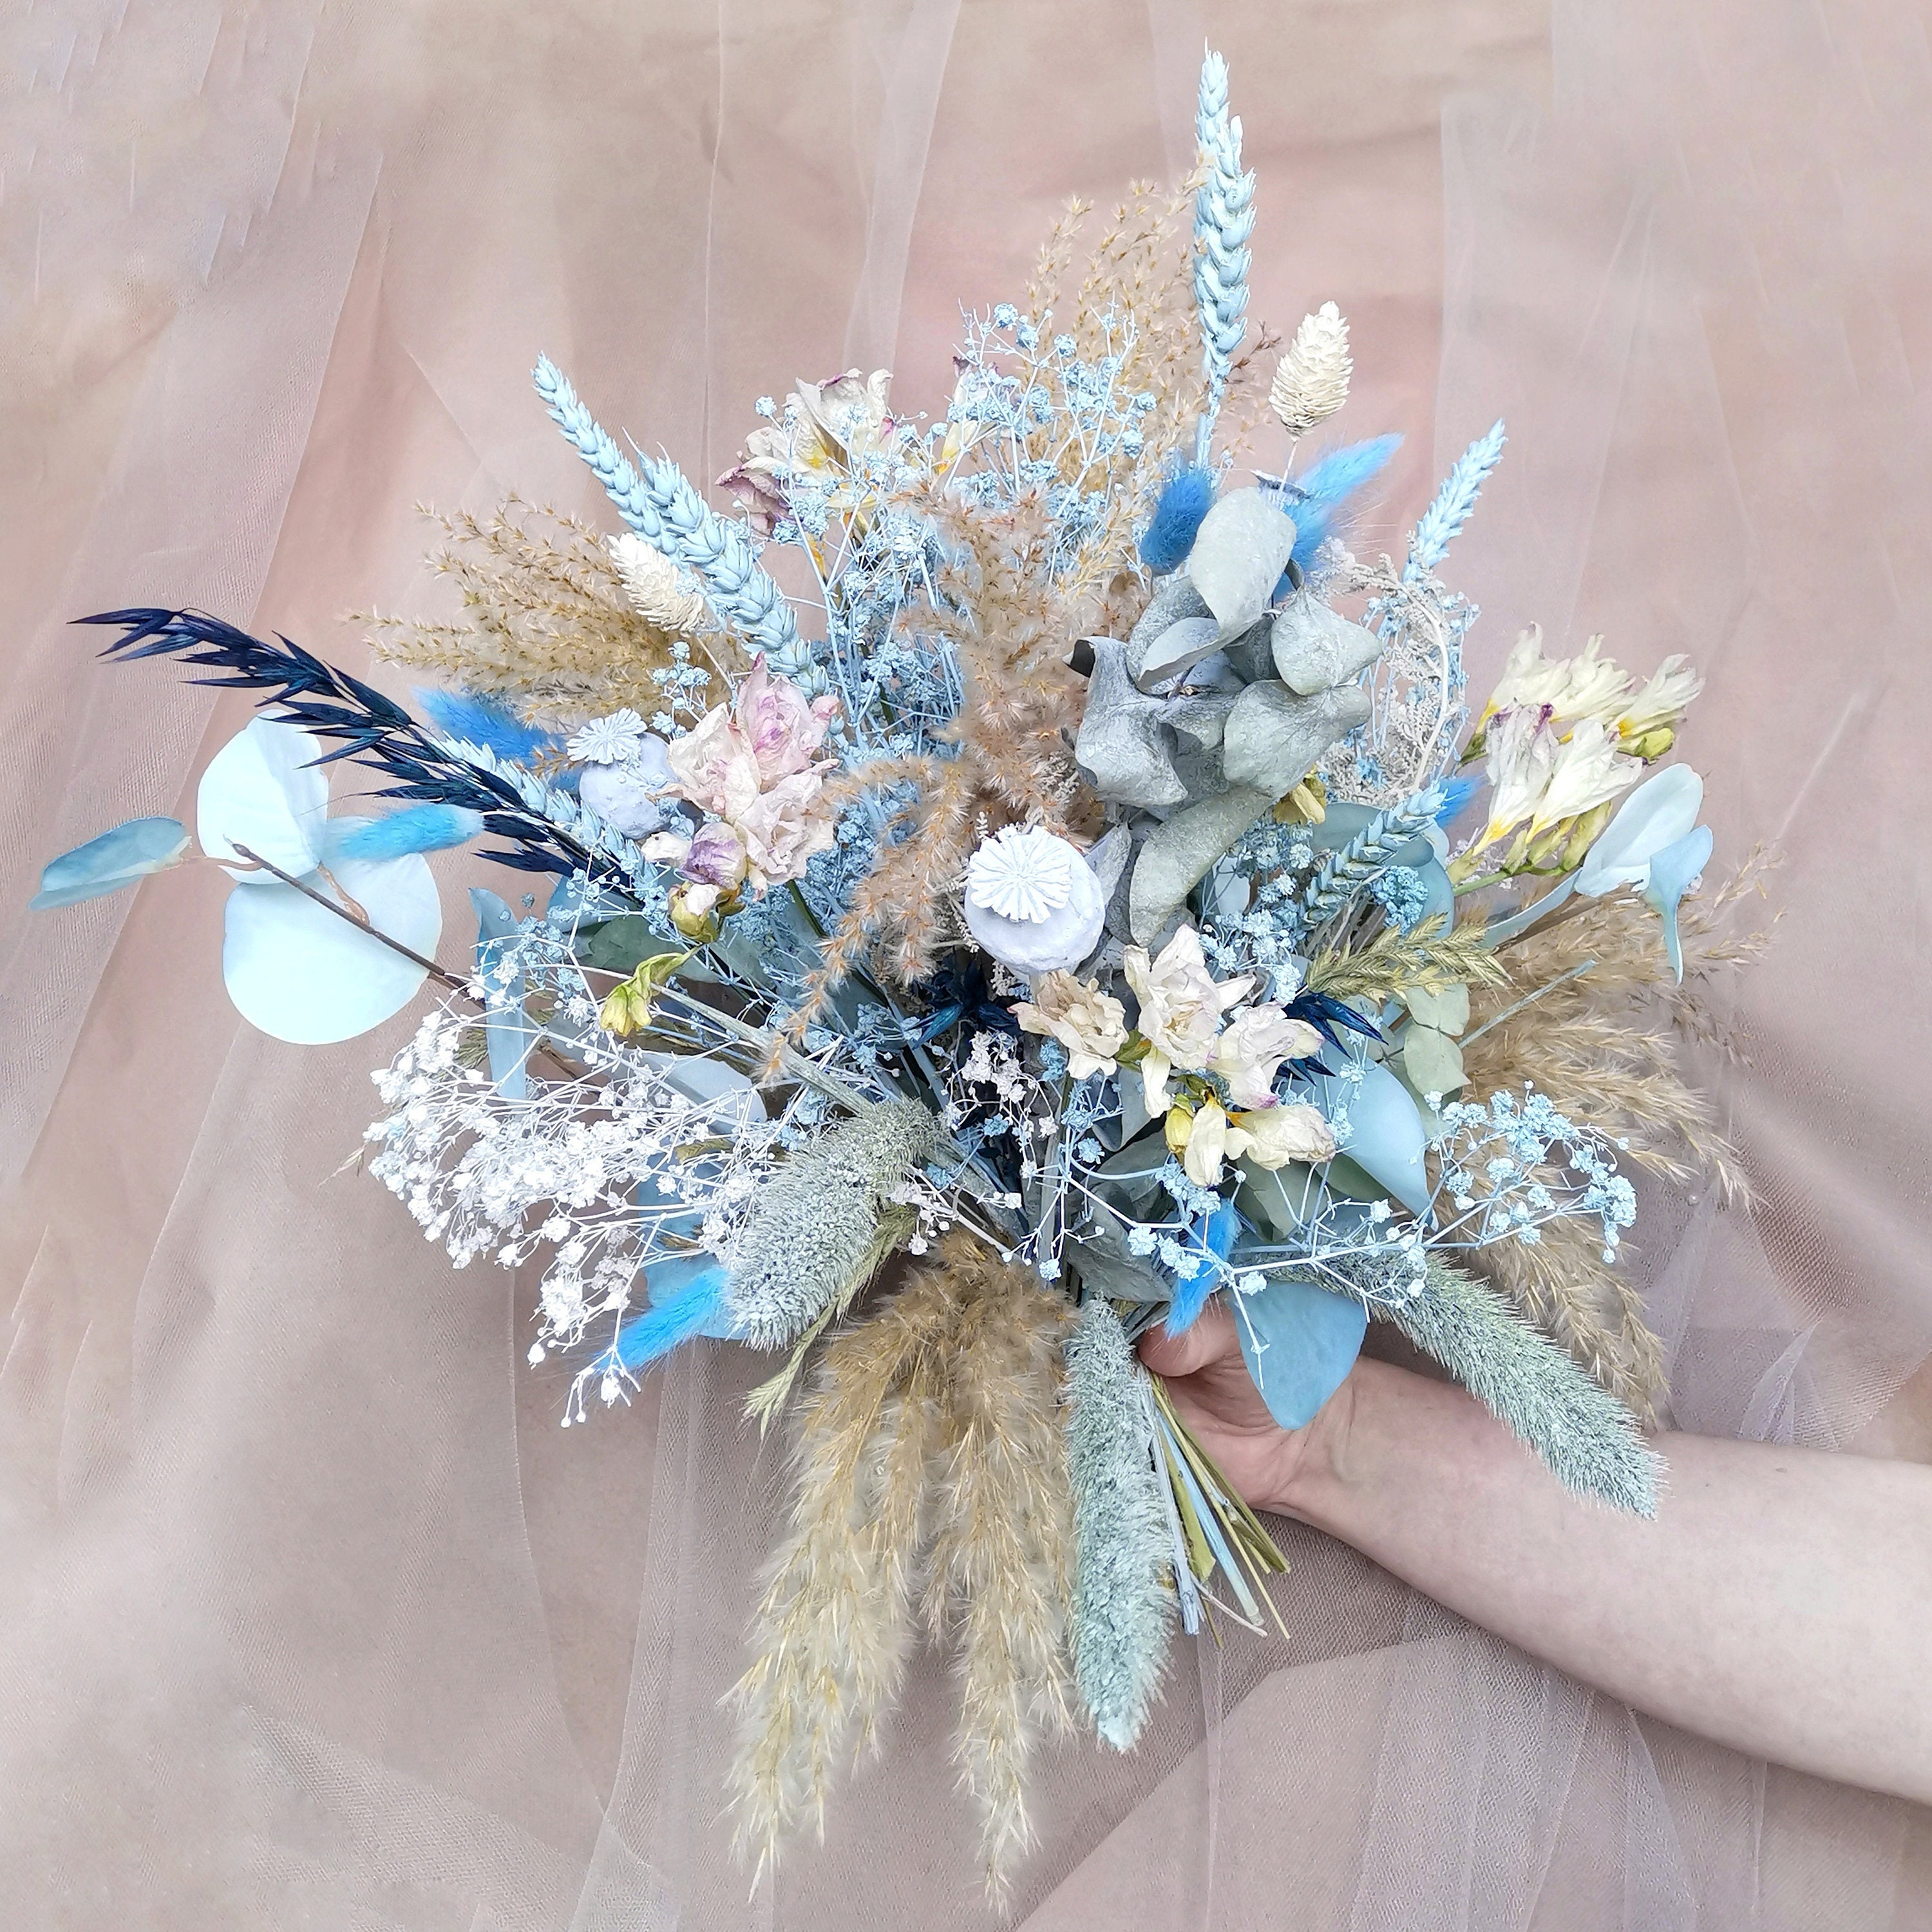 XHXSTORE 36pcs Natural Dried Flowers Bouquet Light Blue Dried Craspedia  Billy Balls Flowers Dried Floral Arrangements for Home Boho Wedding Kitchen